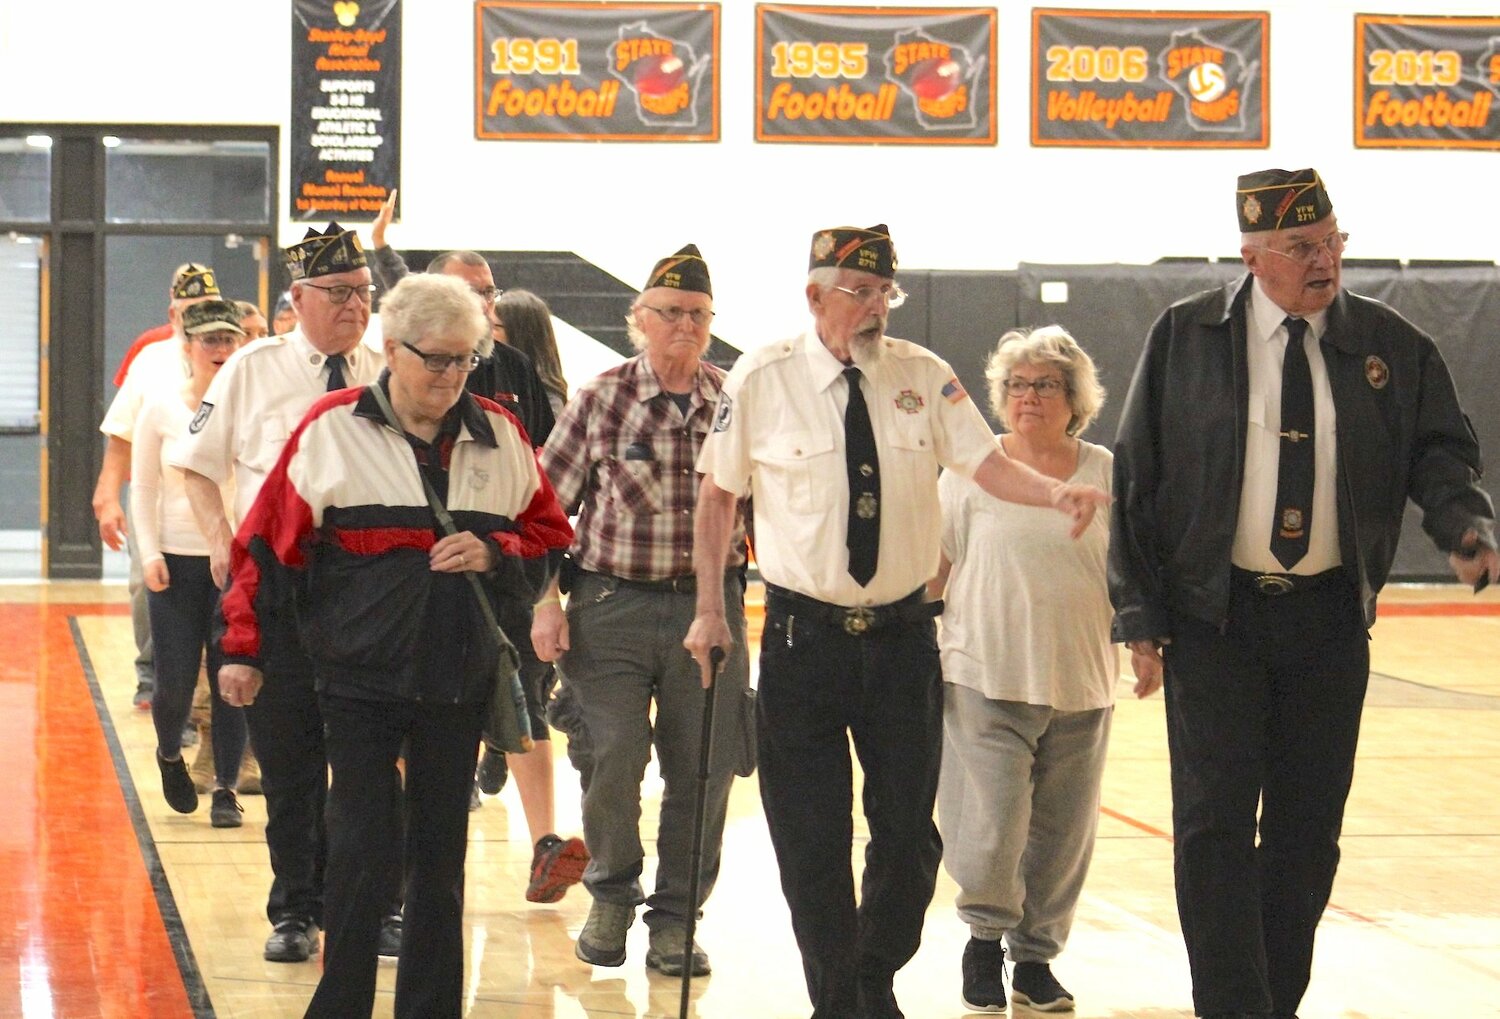 Legion and VFW members and their spouses enter the Stanley-Boyd gymnasium during the Veterans Day Event Friday, Nov. 10. Shown above from right to left are Art Osvold, Anna Toms, John Saunders, Gary Toms, Pat Osvold, Ed Staib, and Amber Broughton.